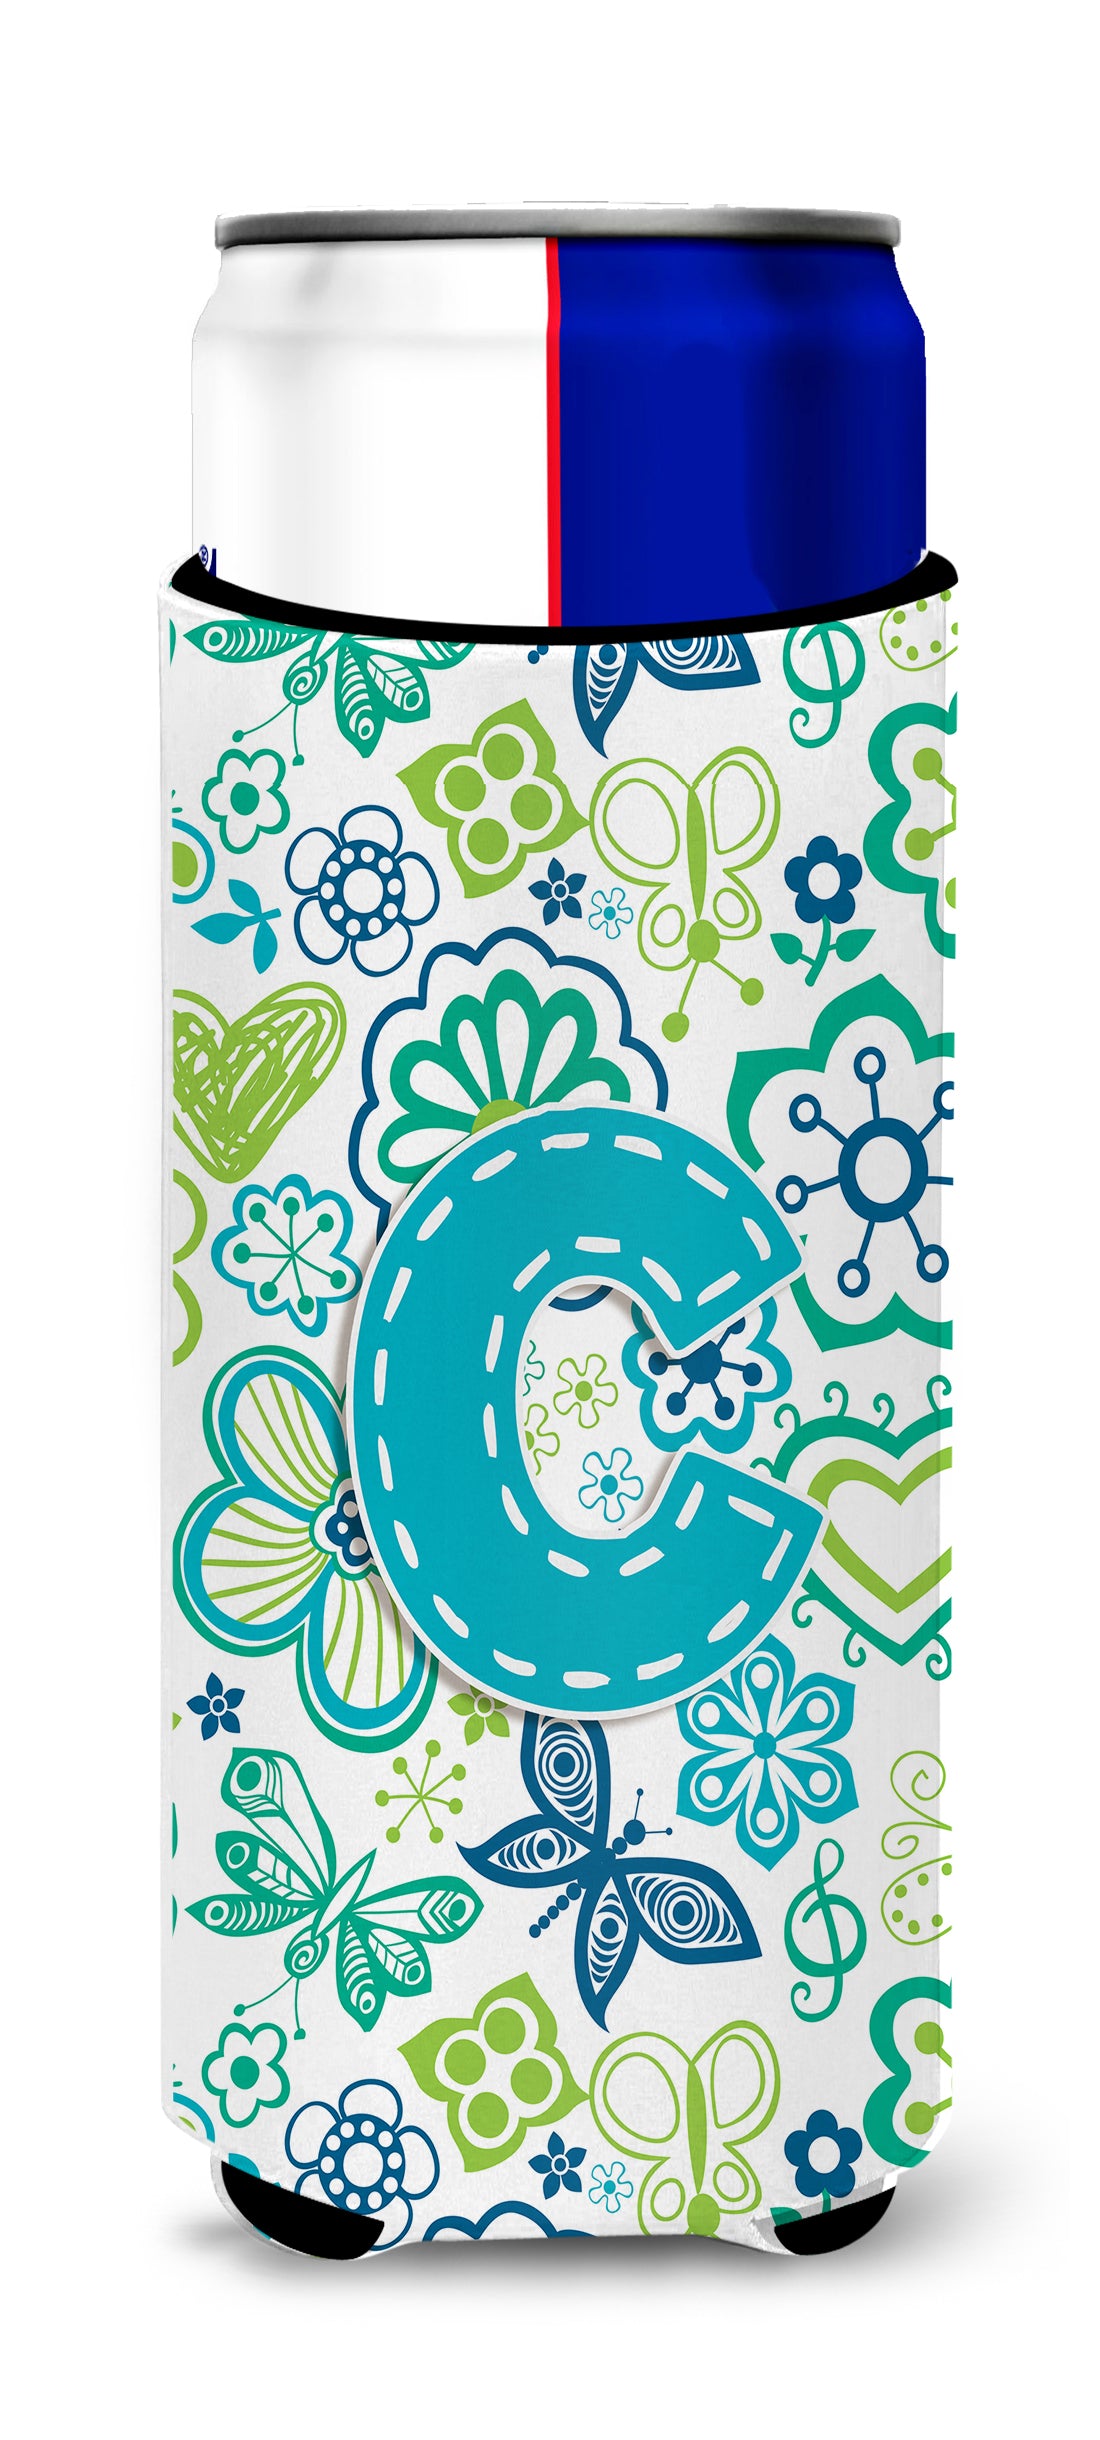 Letter C Flowers and Butterflies Teal Blue Ultra Beverage Insulators for slim cans CJ2006-CMUK